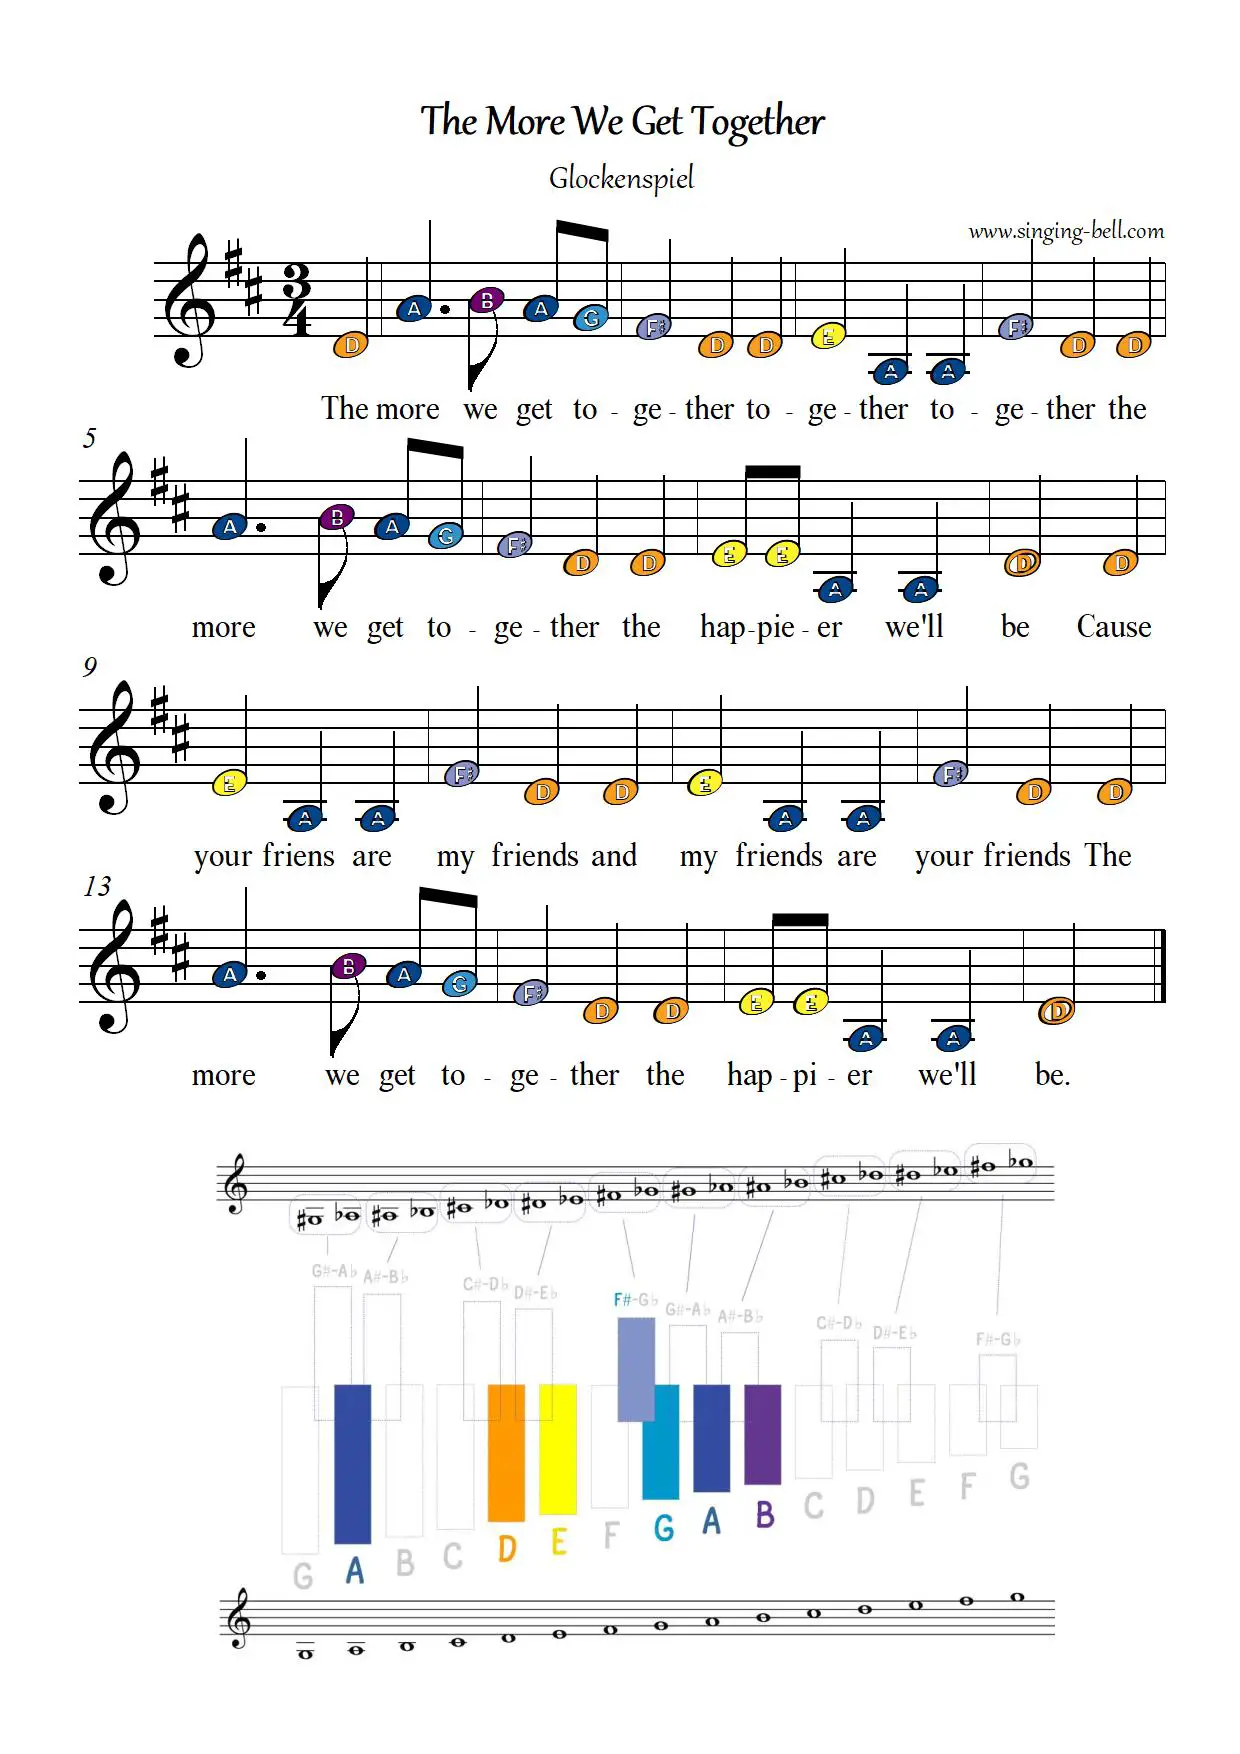 The more we get together free xylophone glockenspiel sheet music color notes chart pdf